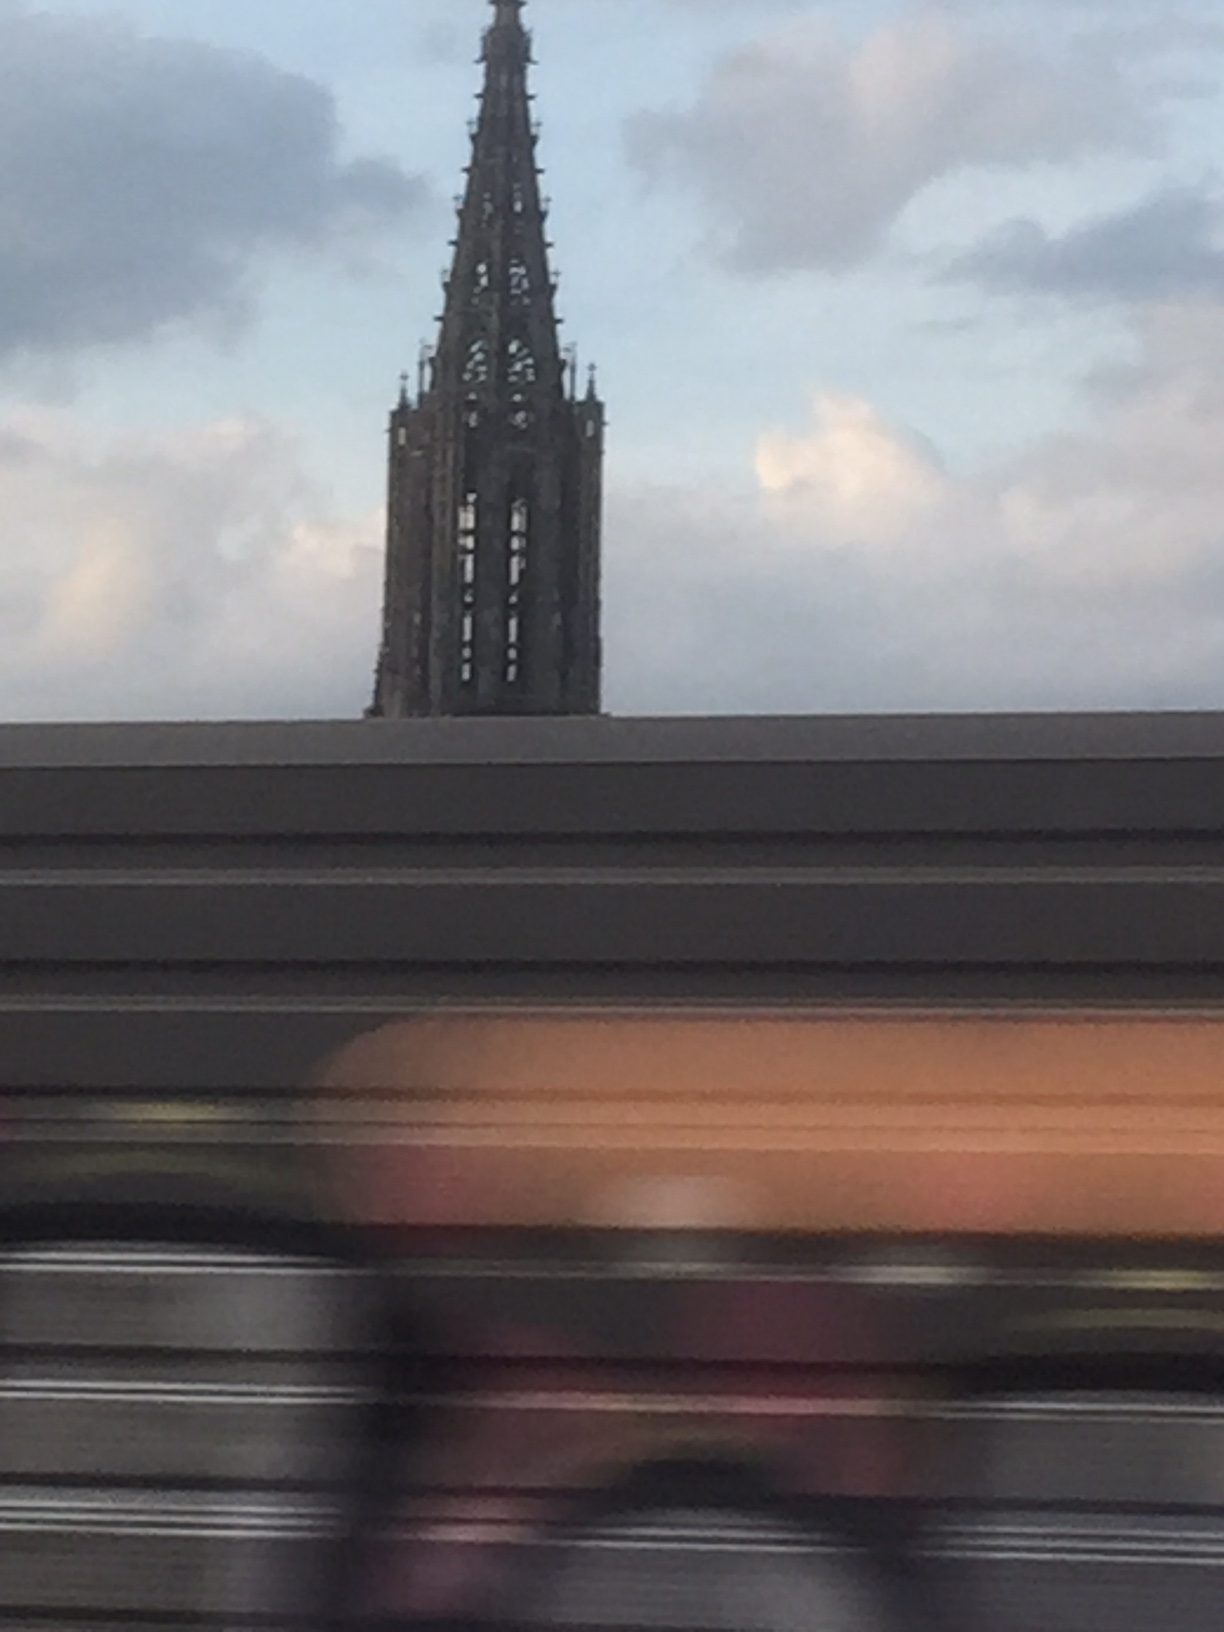 Paris to Munich: Ulm. The steeple of the minister from the train. Tallest in the world.